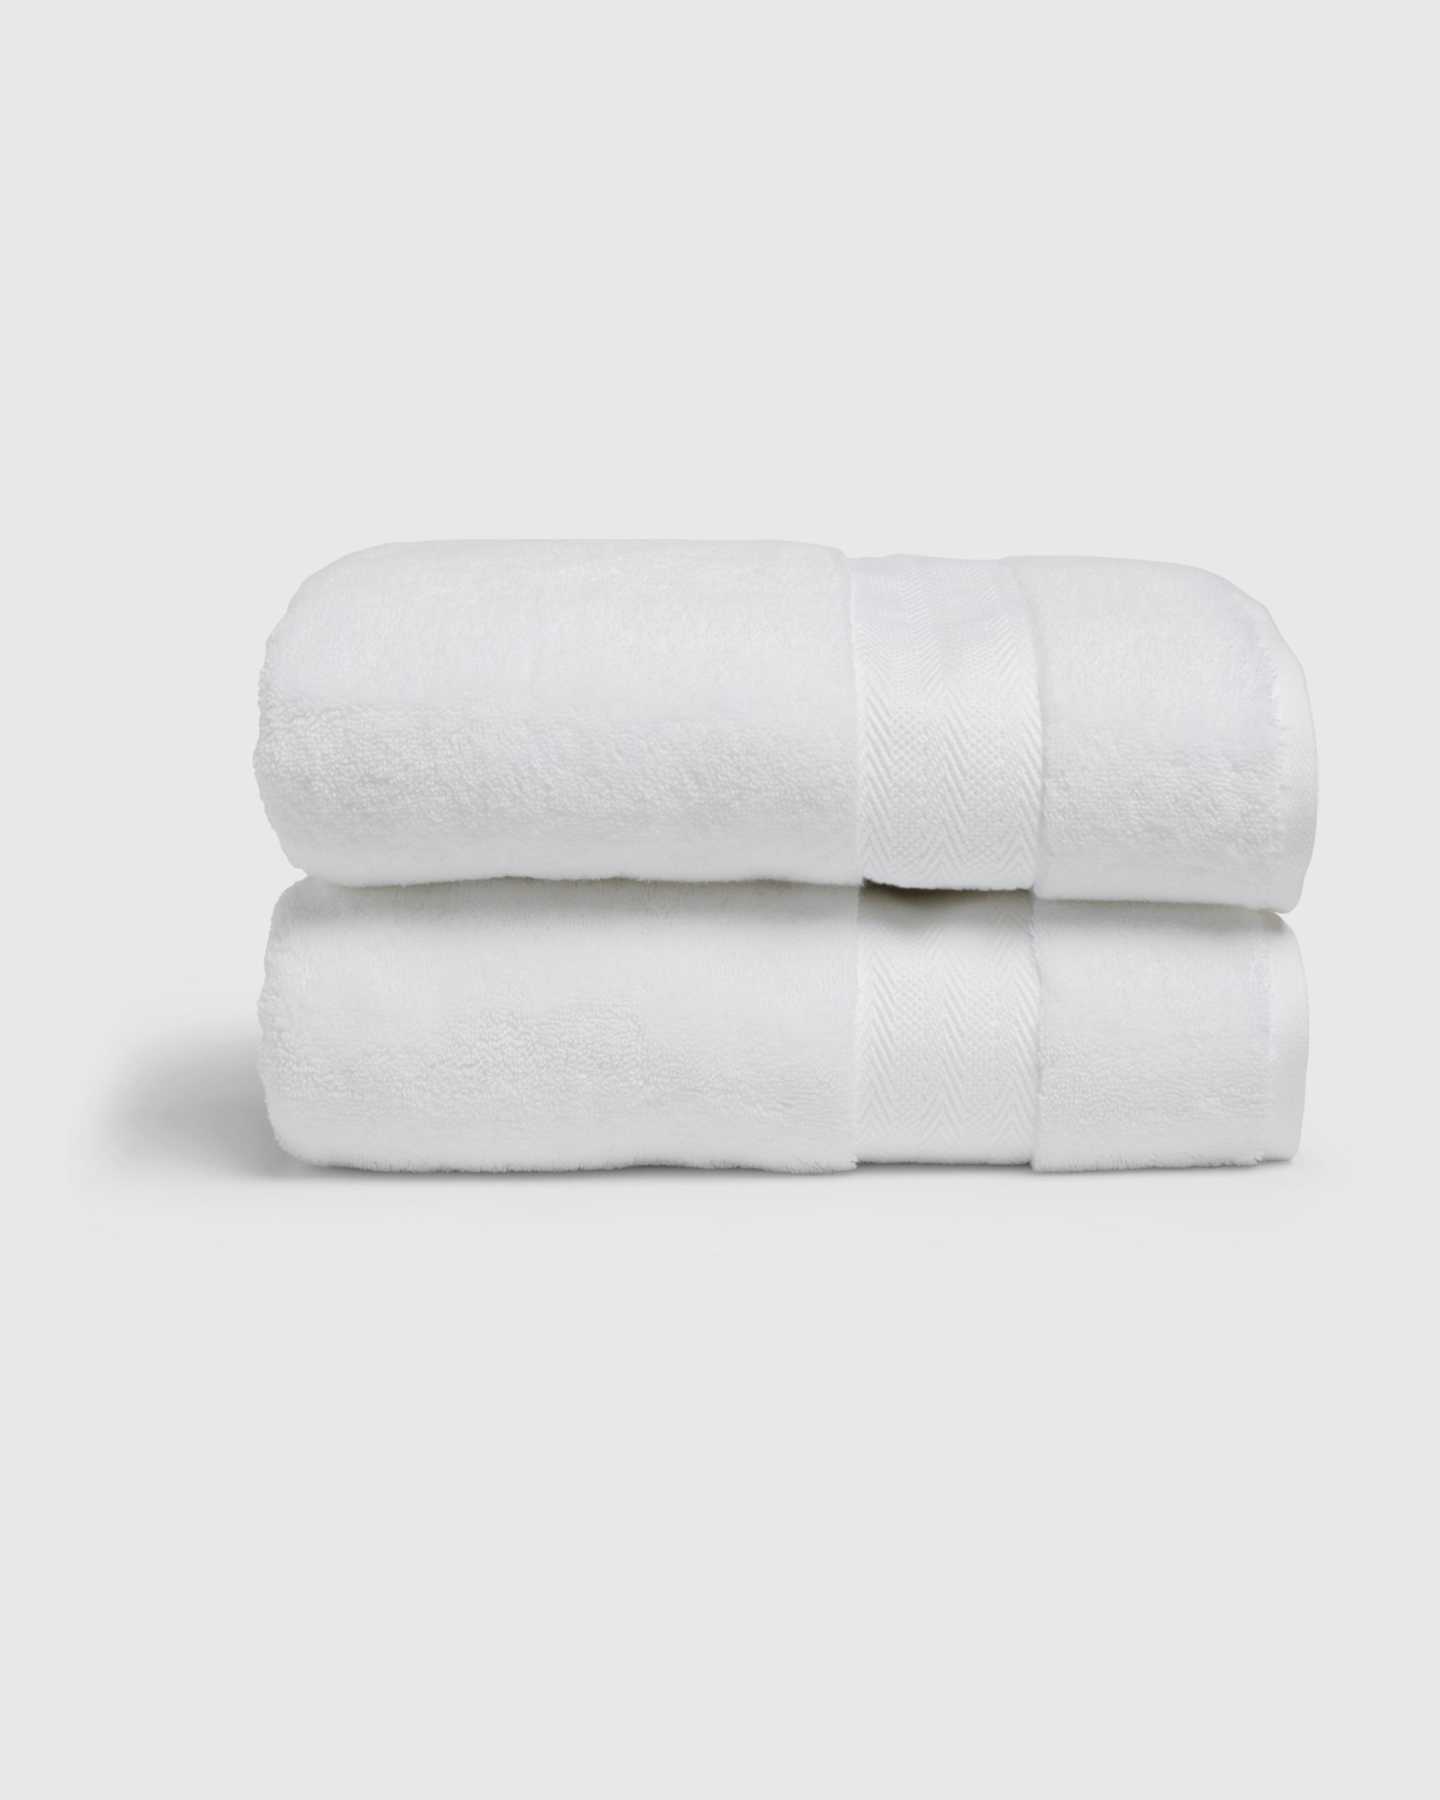 You May Also Like - Turkish Spa Bath Towels (Set of 2) - White